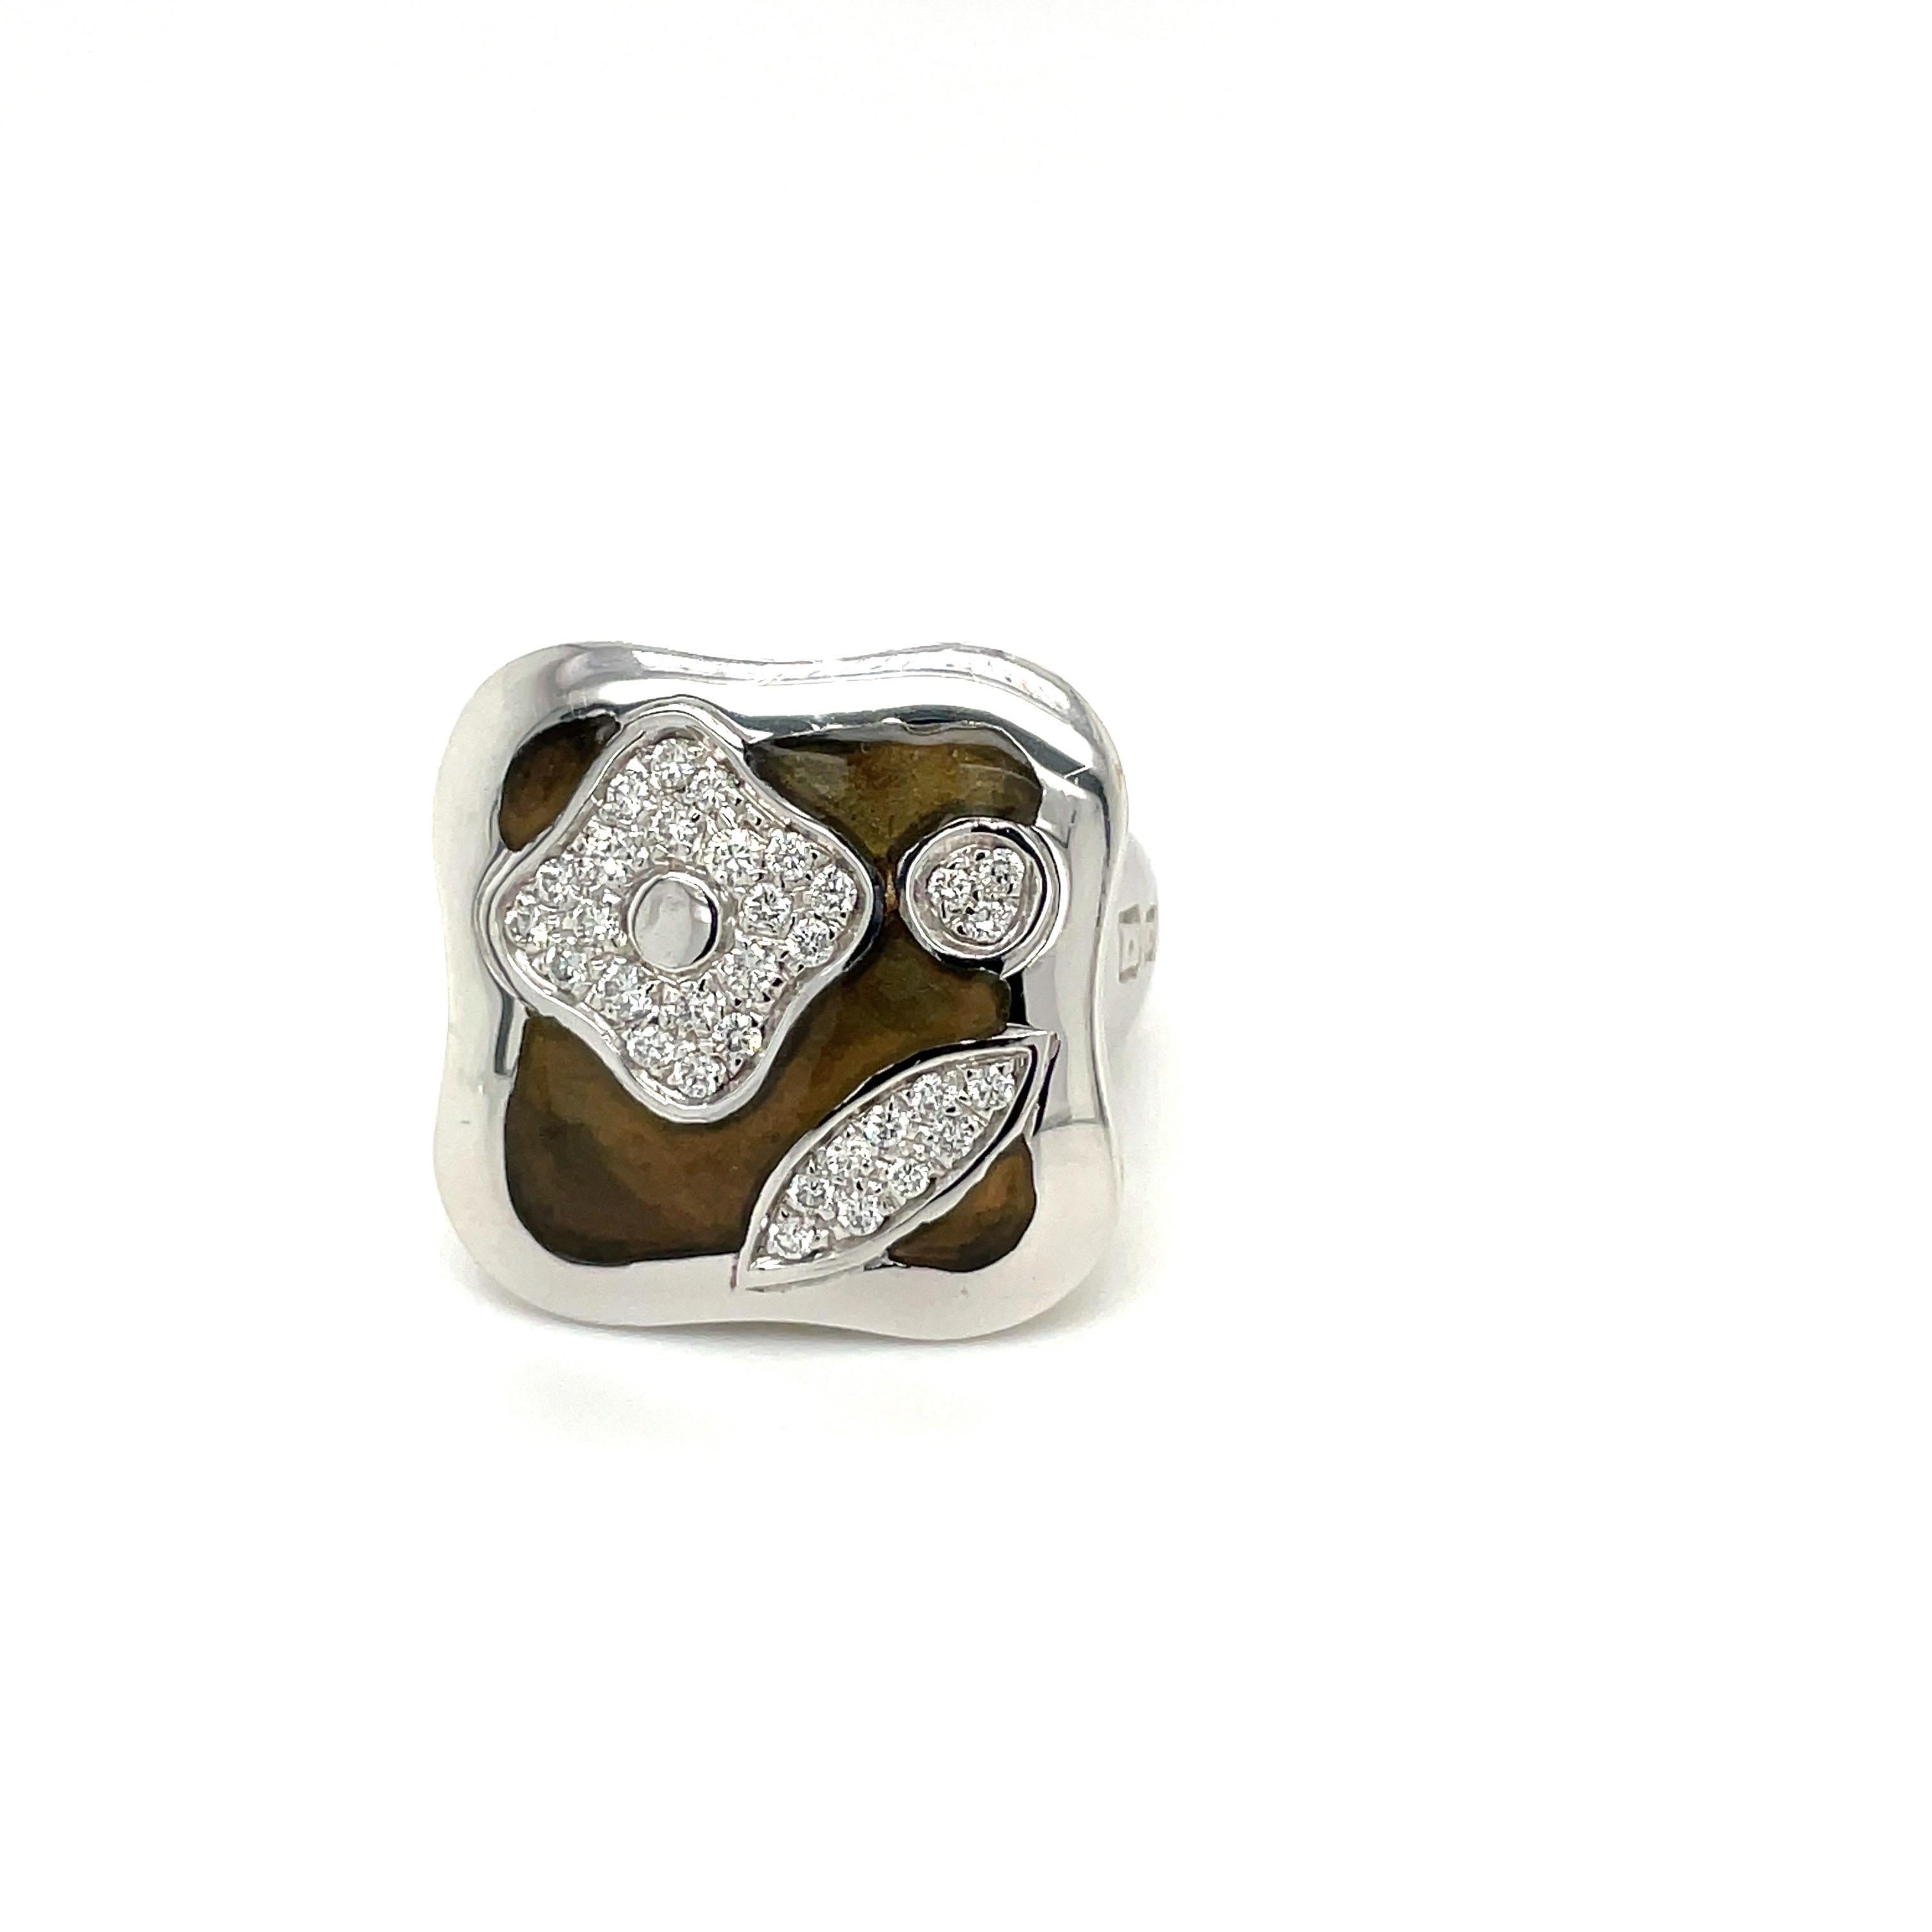 La Nouvelle 18kt White Gold Fiori Ring .39cts Diamond & Enamel In New Condition For Sale In New York, NY